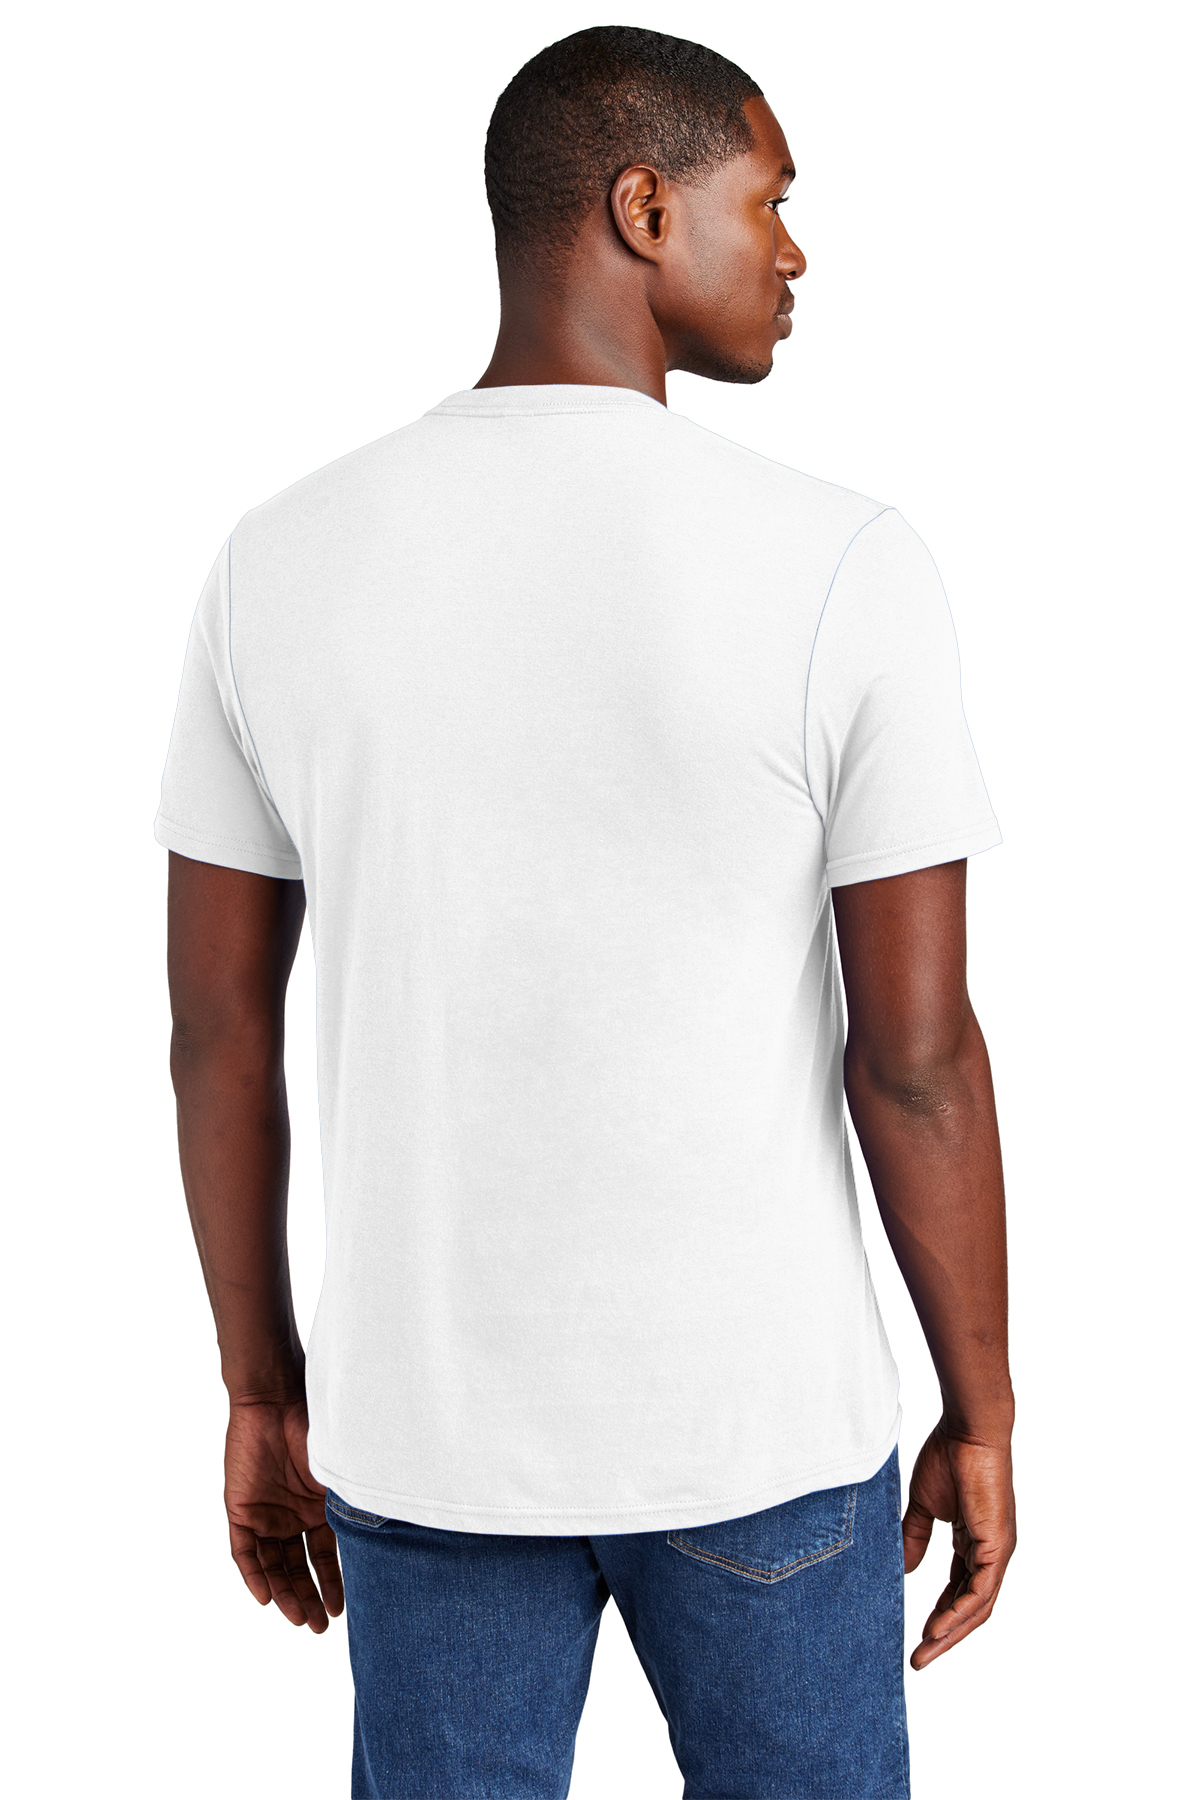 District Very Important Tee with Pocket | Product | SanMar